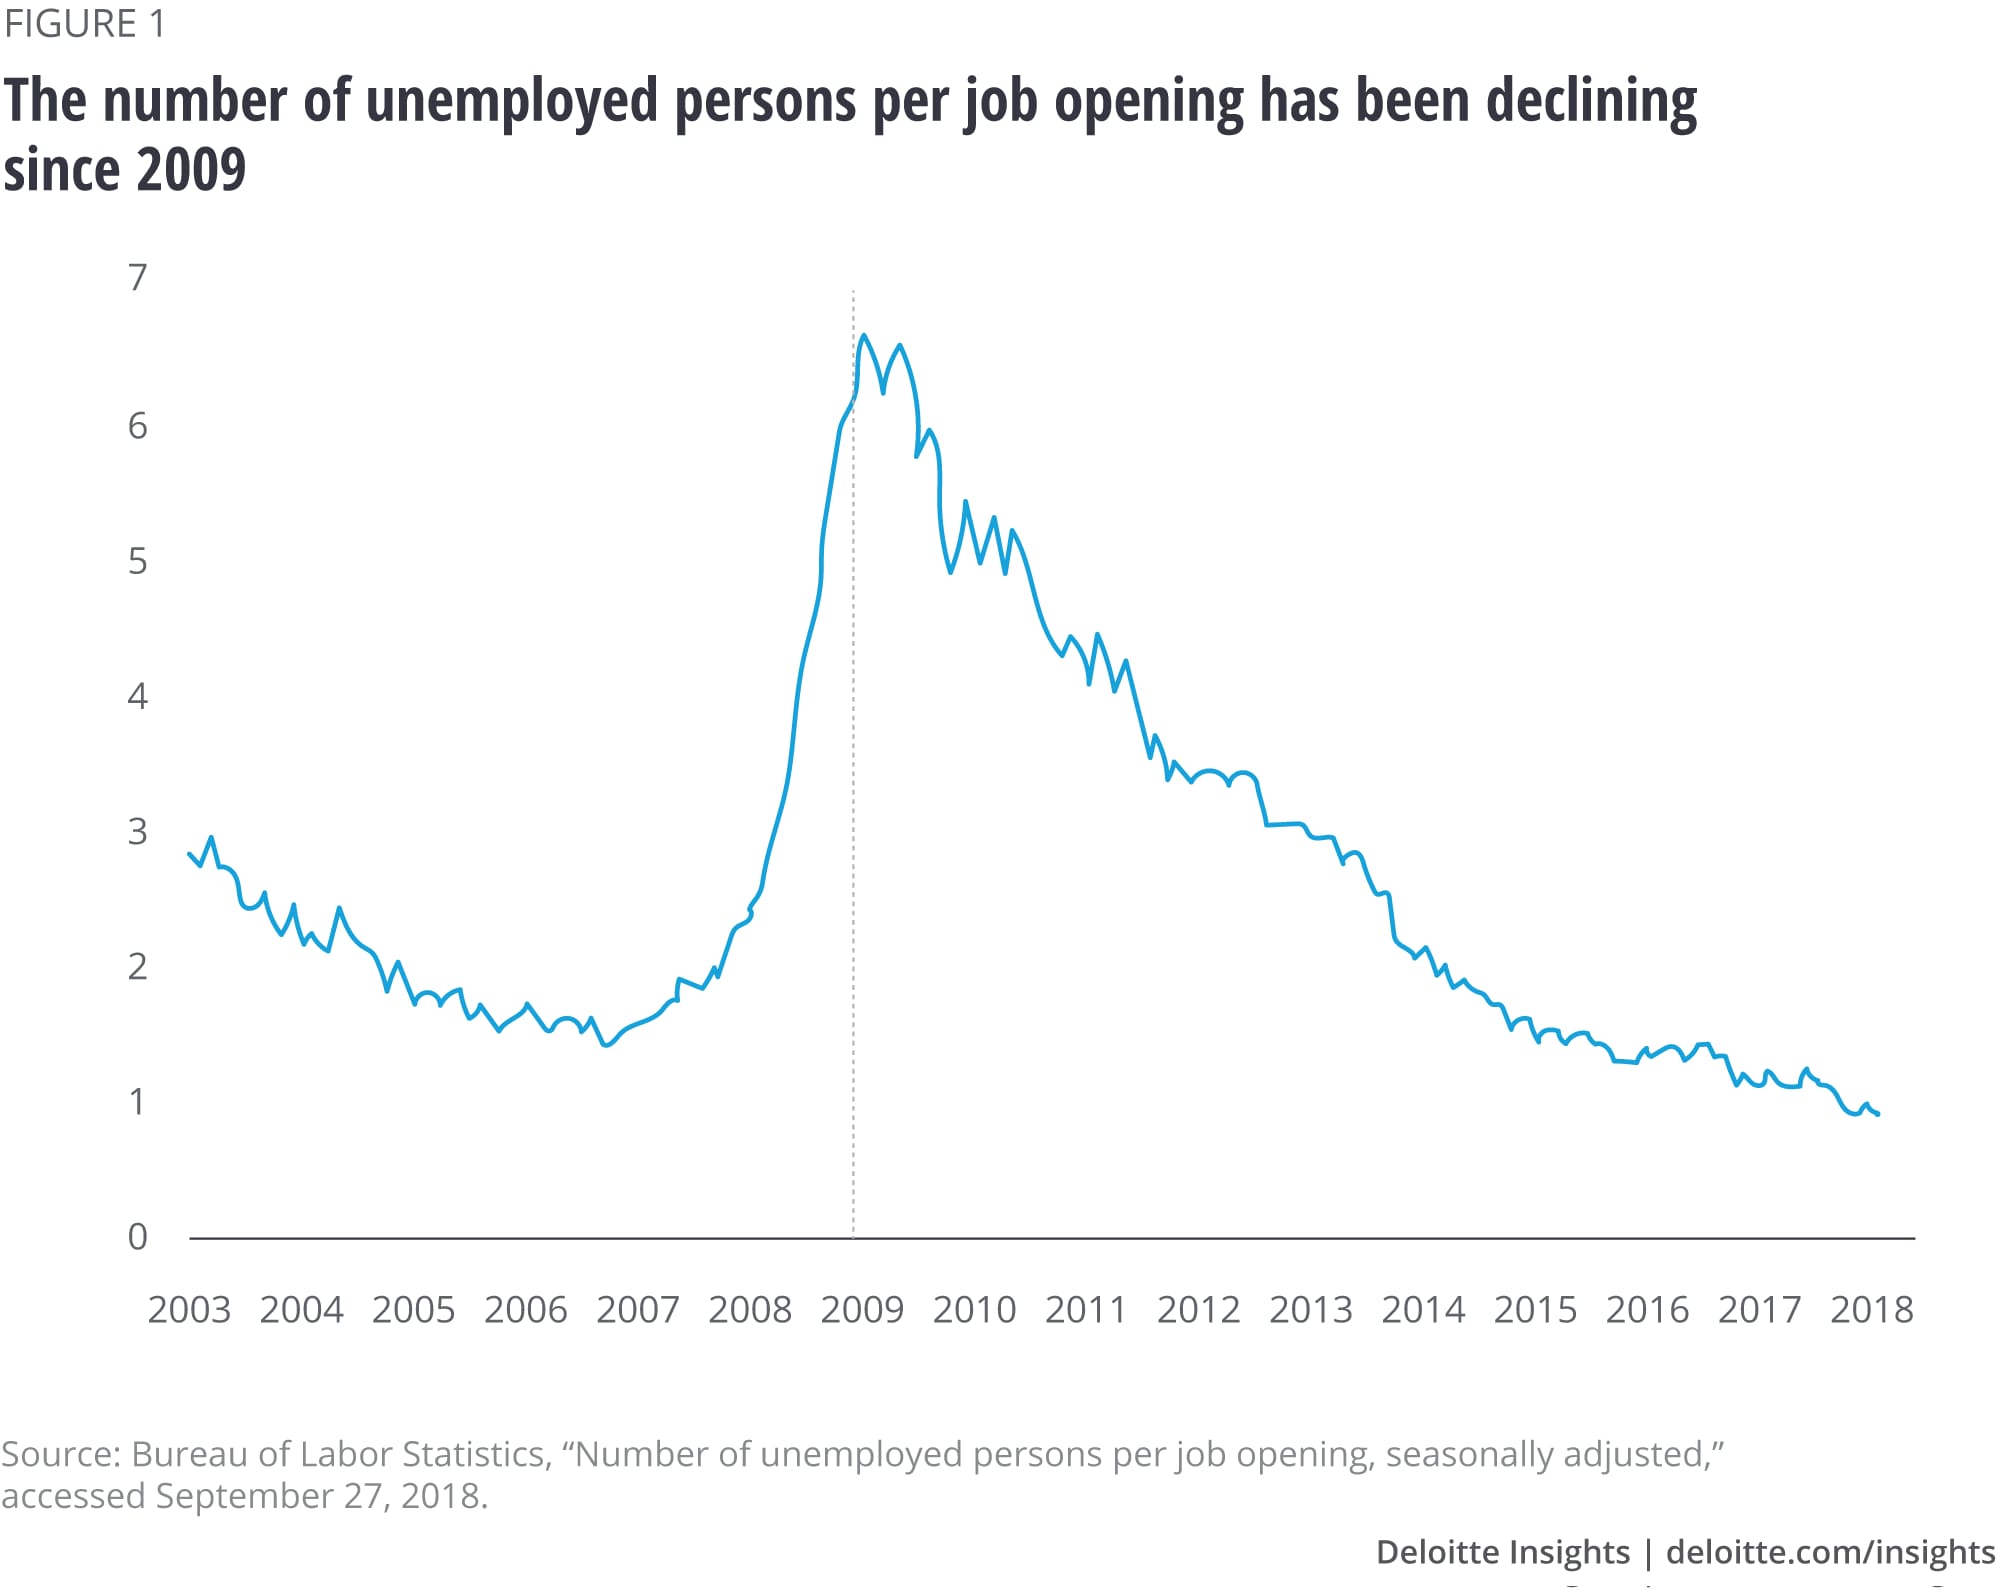 The number of unemployed persons per job opening has been declining since 2009